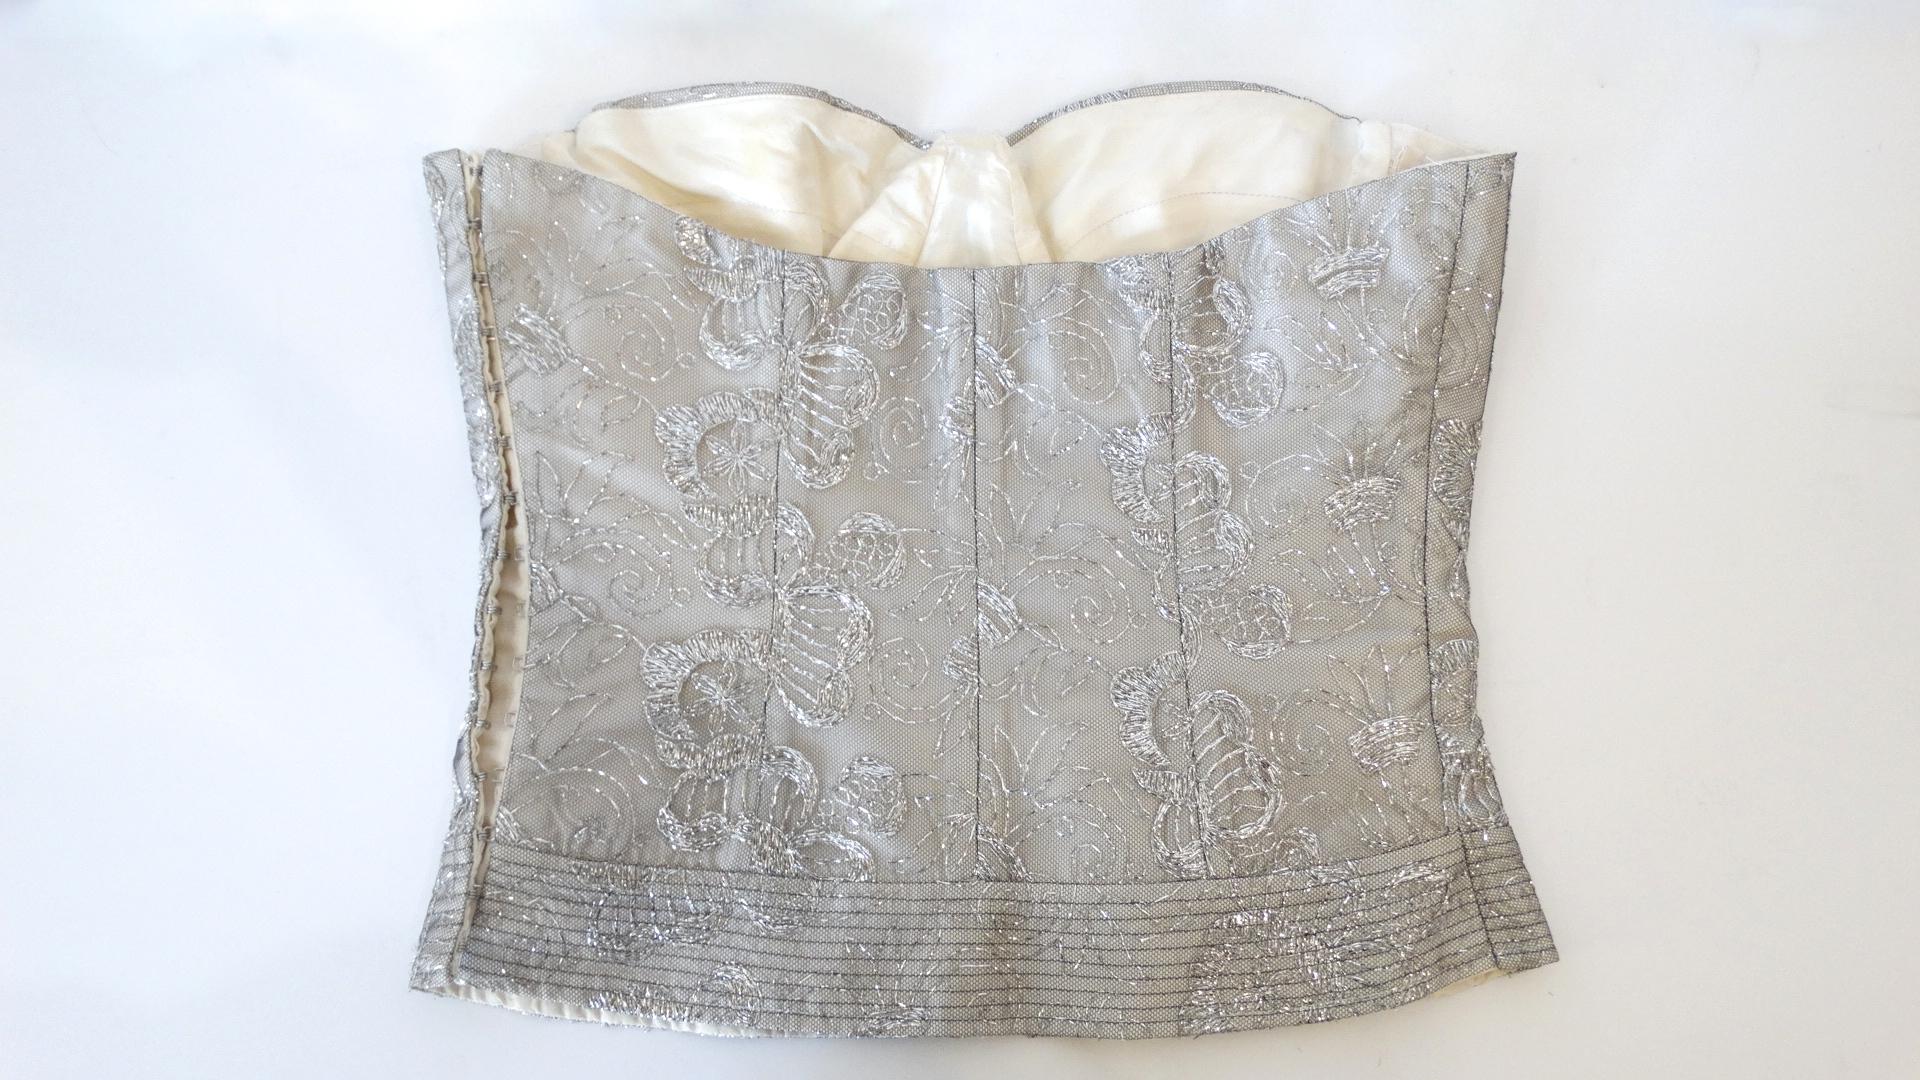 The resurgence of the Corset trend is in full force! Rock a one of a kind piece of your own with this futuristic Christian Dior Boutique silver bustier! Incredible boned construction with shaped, lined cups. Glittering silver brocade like fabric